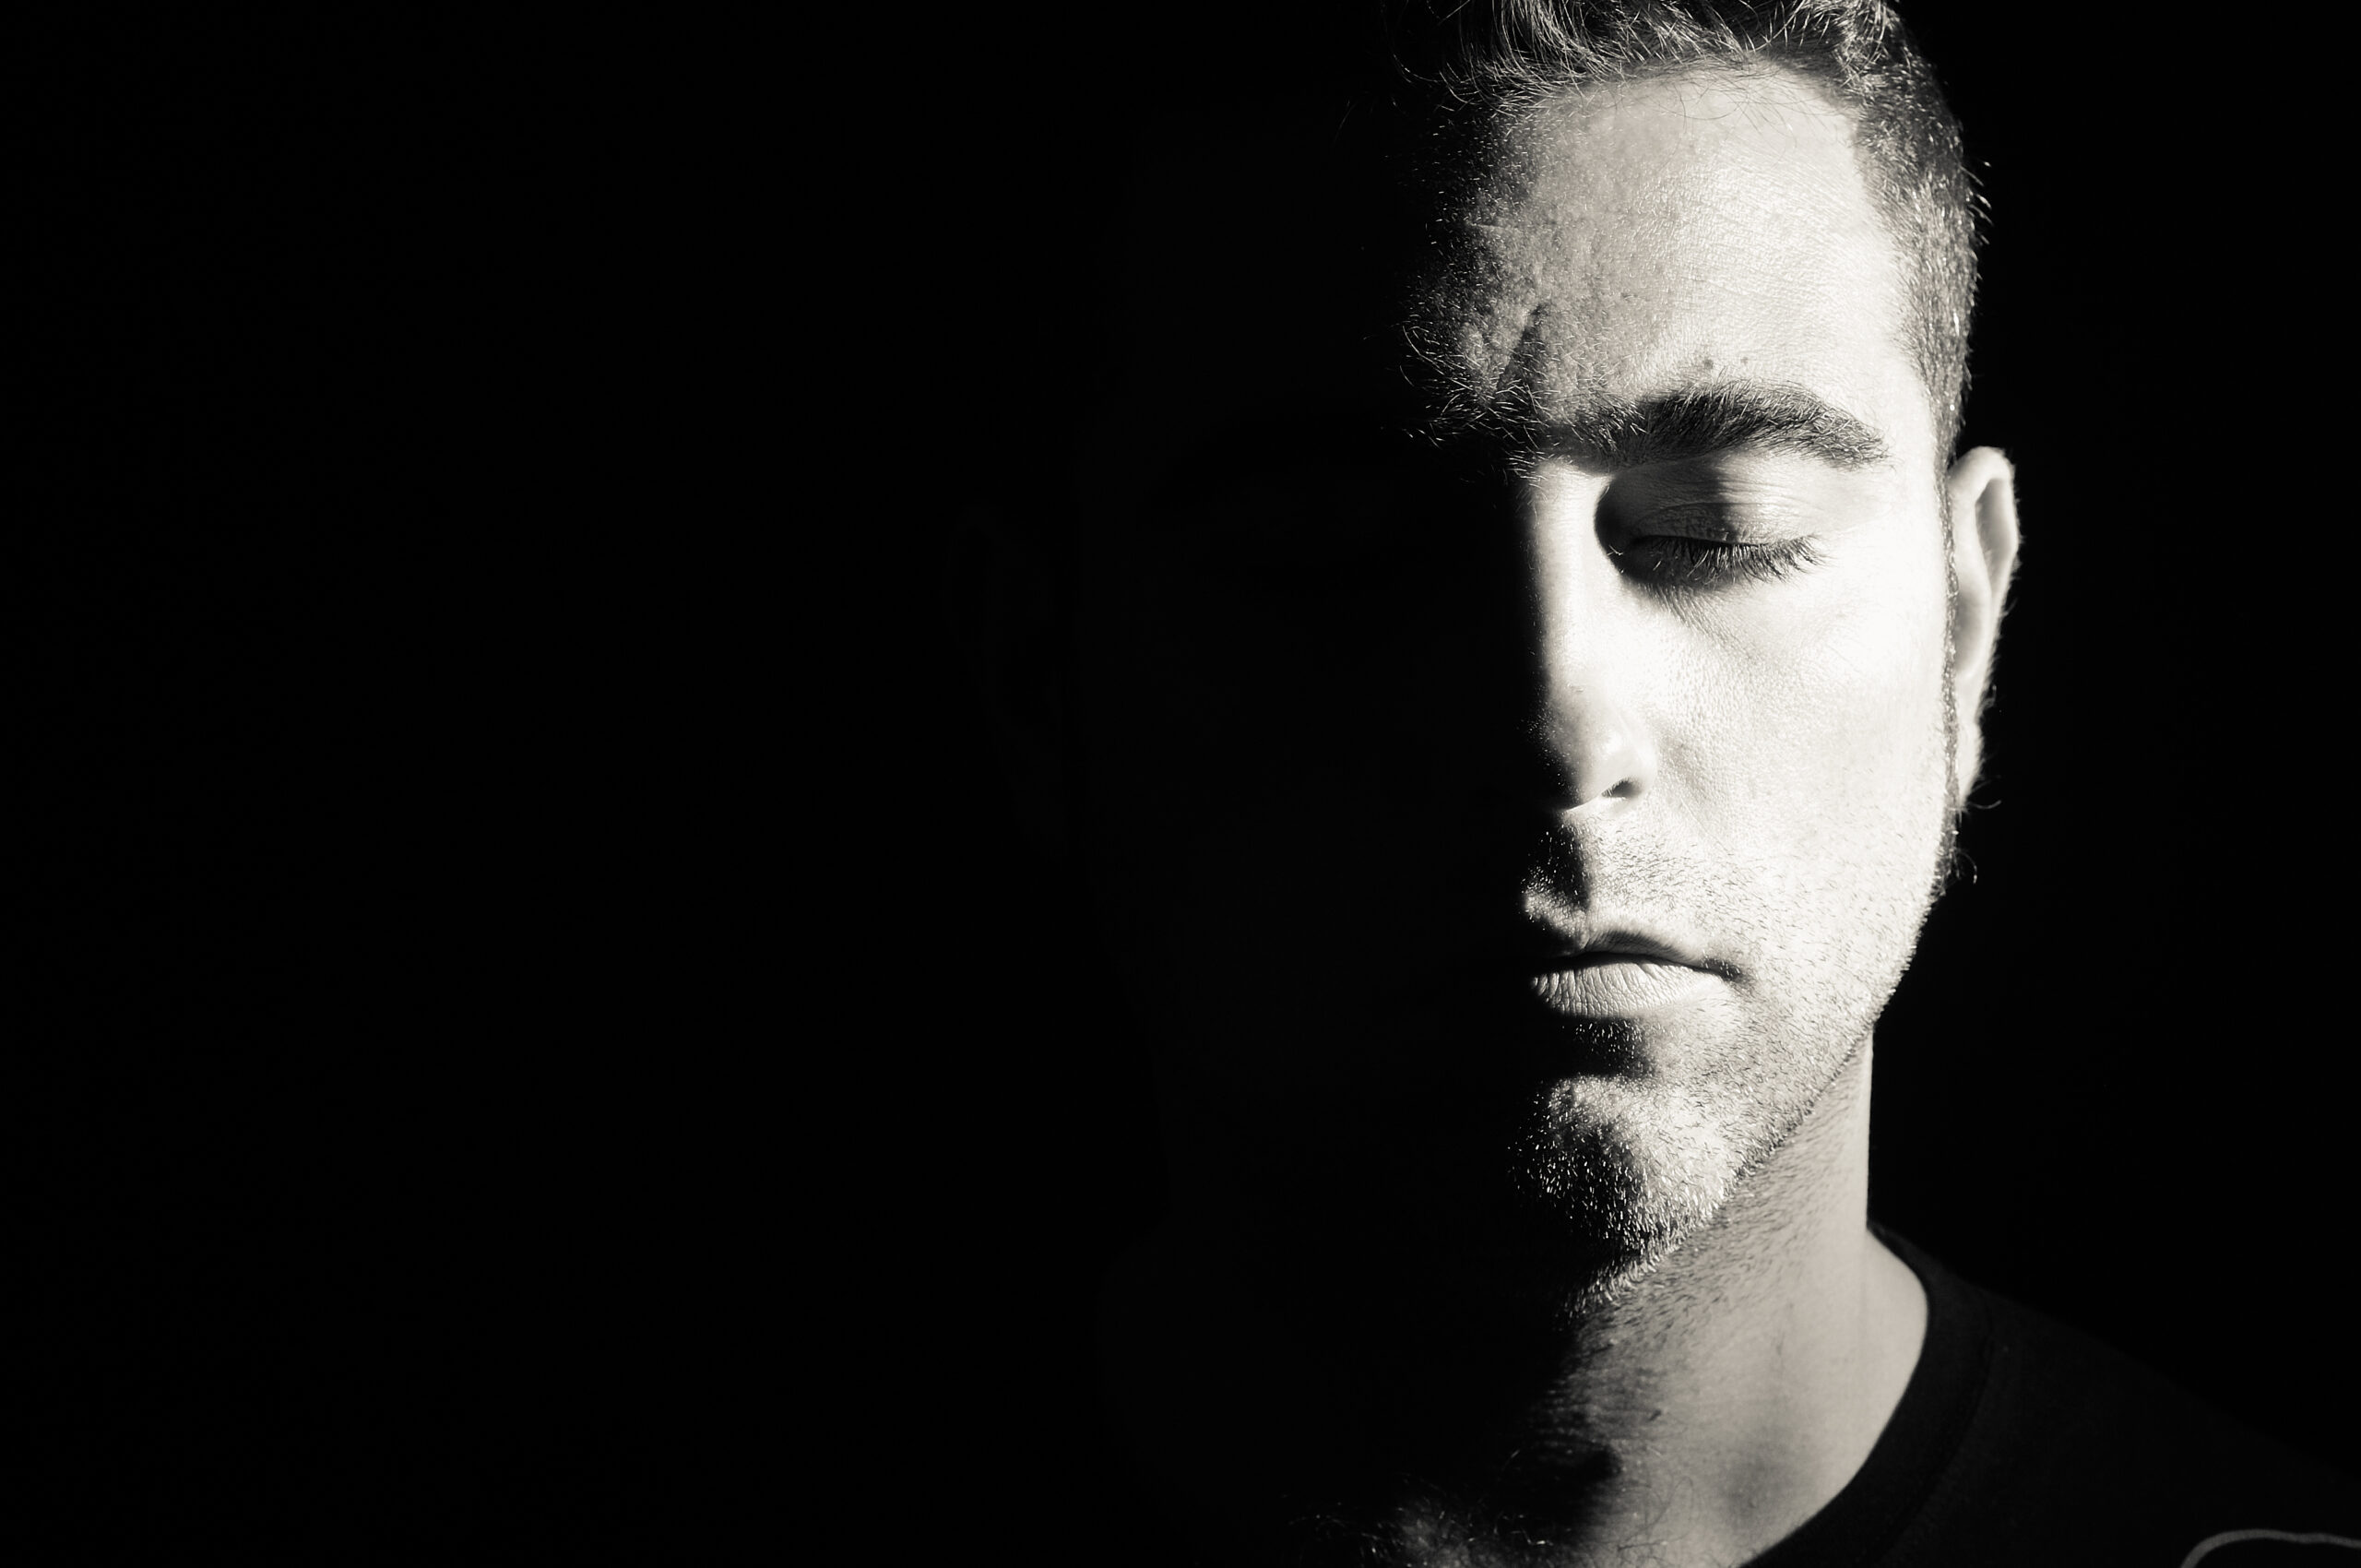 Close-up Of Man With Eyes Closed Against Black Background indicating the power of pause.